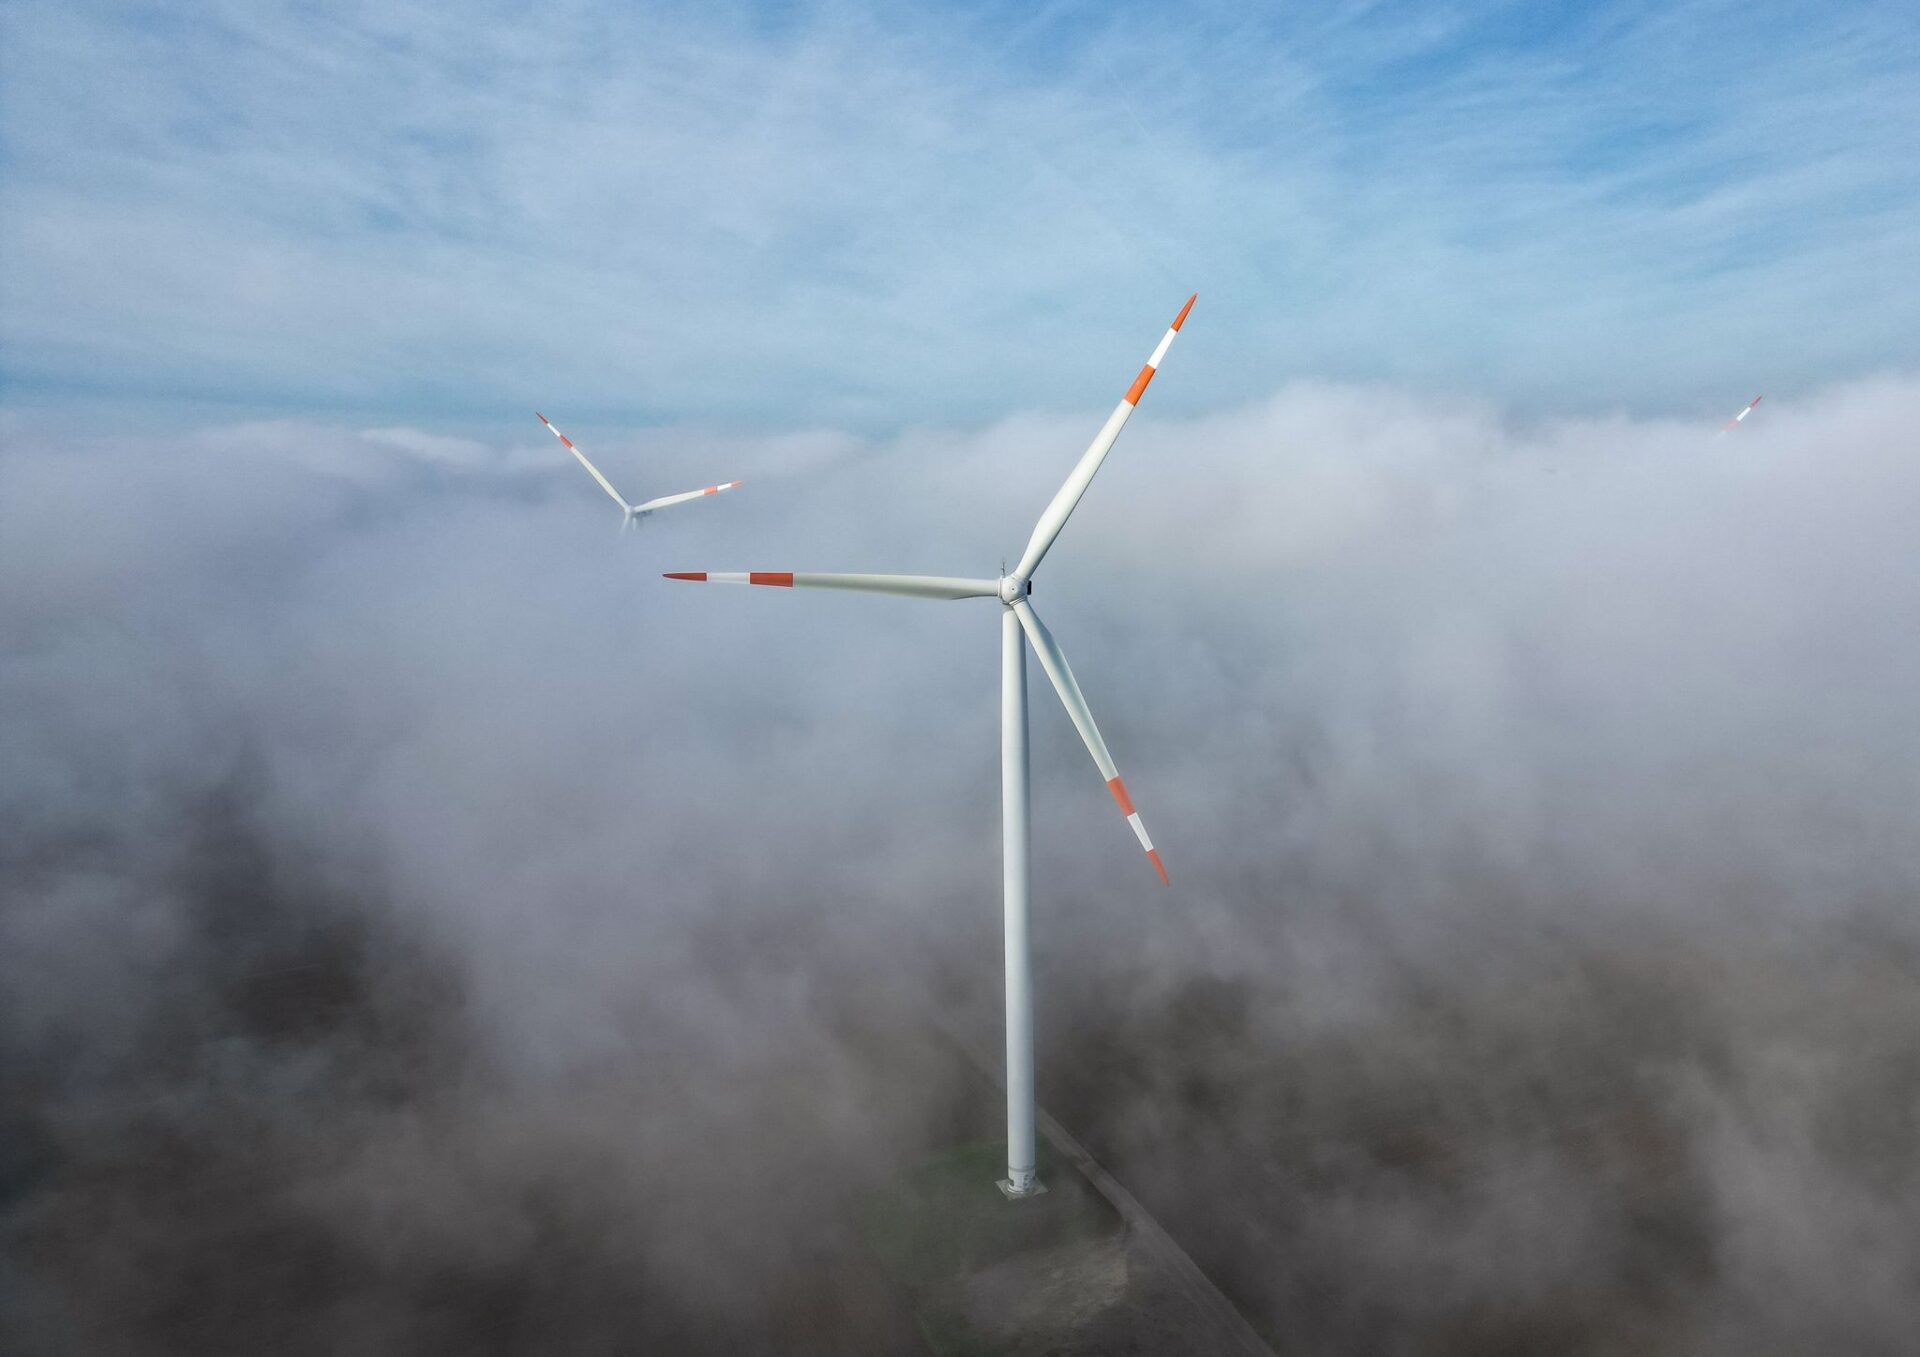 The wind turbines in a wind farm stand out of the morning fog. The European Commission presented on Tuesday new measures to boost the European wind power industry to reach the European Union's targets for renewable energy generation by 2030.